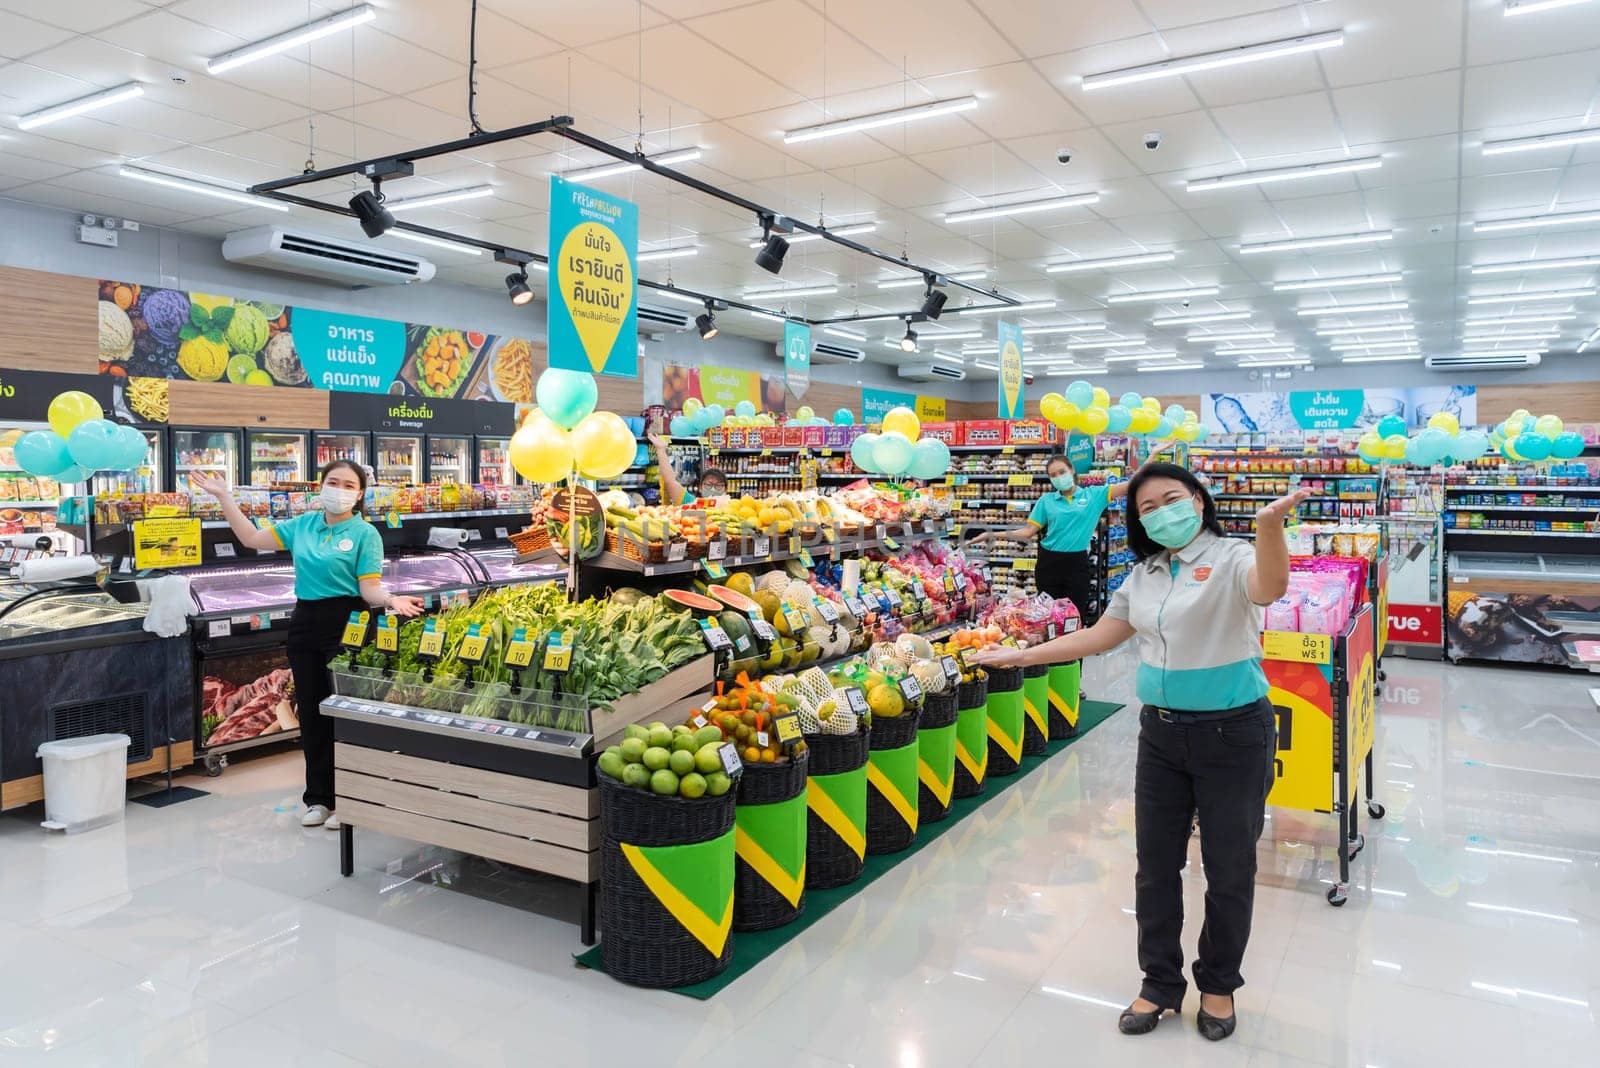 Bangkok, Thailand - November 23, 2021 : Unidentified supermarket or hypermarket is a popular destination for shopping a food and relaxing family.